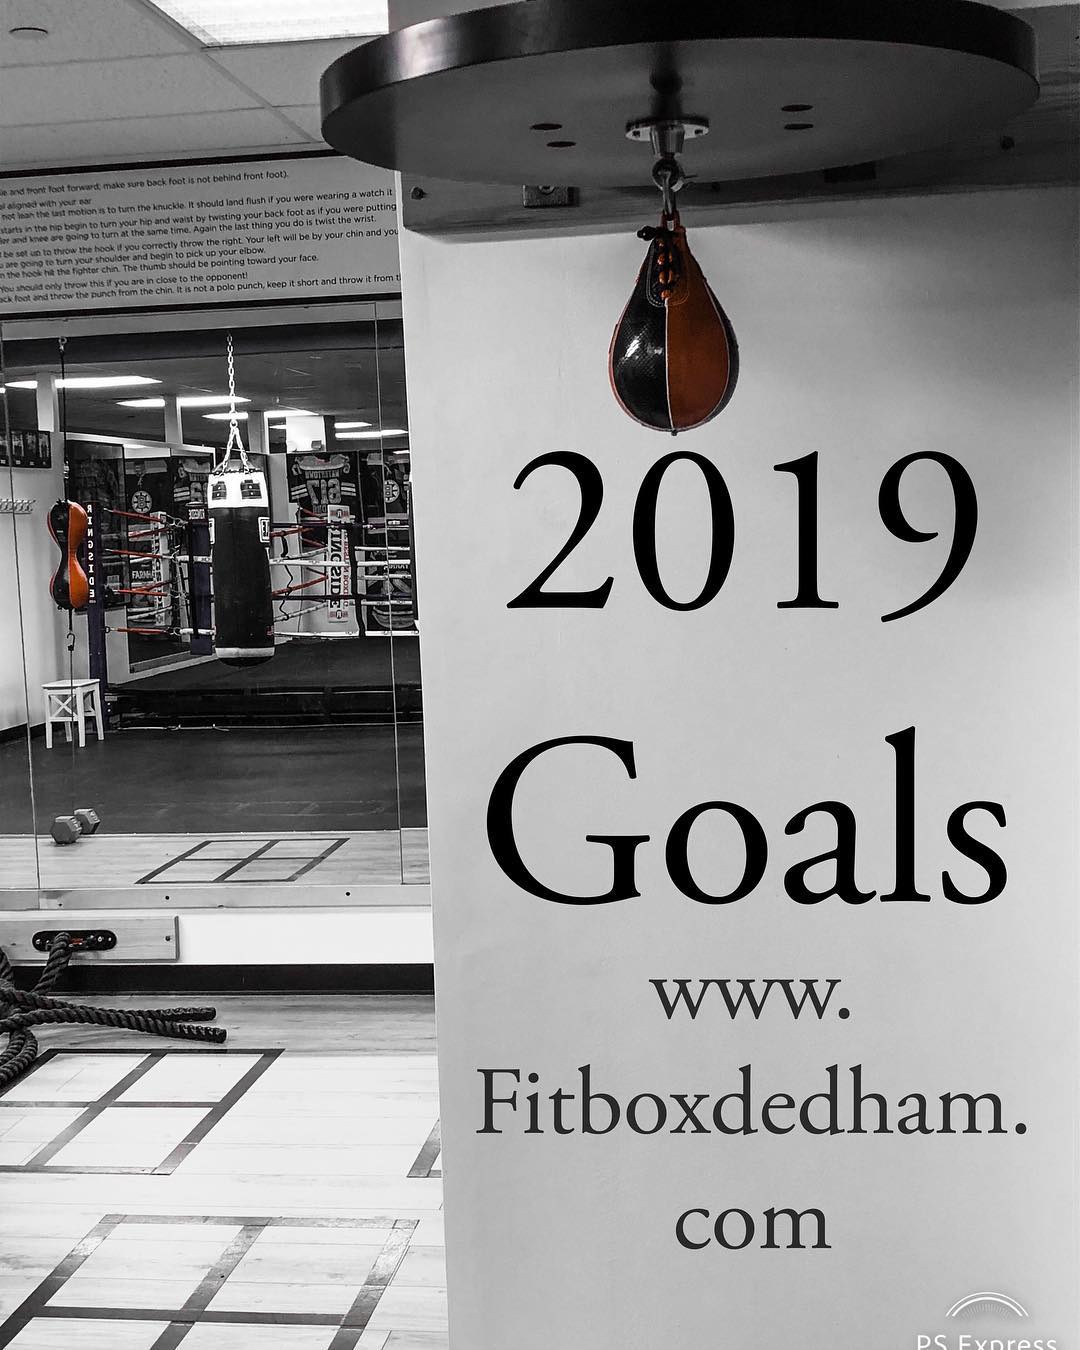 Let’s change that weekly workout routine up and check off one of those 2019 goals. Sign up for a FREE Boxing Workout located in Dedham,MA at (781)727-9503 or fitbox@outlook.com. . #boxing with @tommymcinerney #fitness #2019 #resolutions #goals #boutique #gym #workout #exercise #workoutmotivation #bestofthebest #cardio #conditioning #weightloss #feelgood #sweetscience #boston #dedham #realdeal #mittwork #padwork #boxfit #ring #🥊